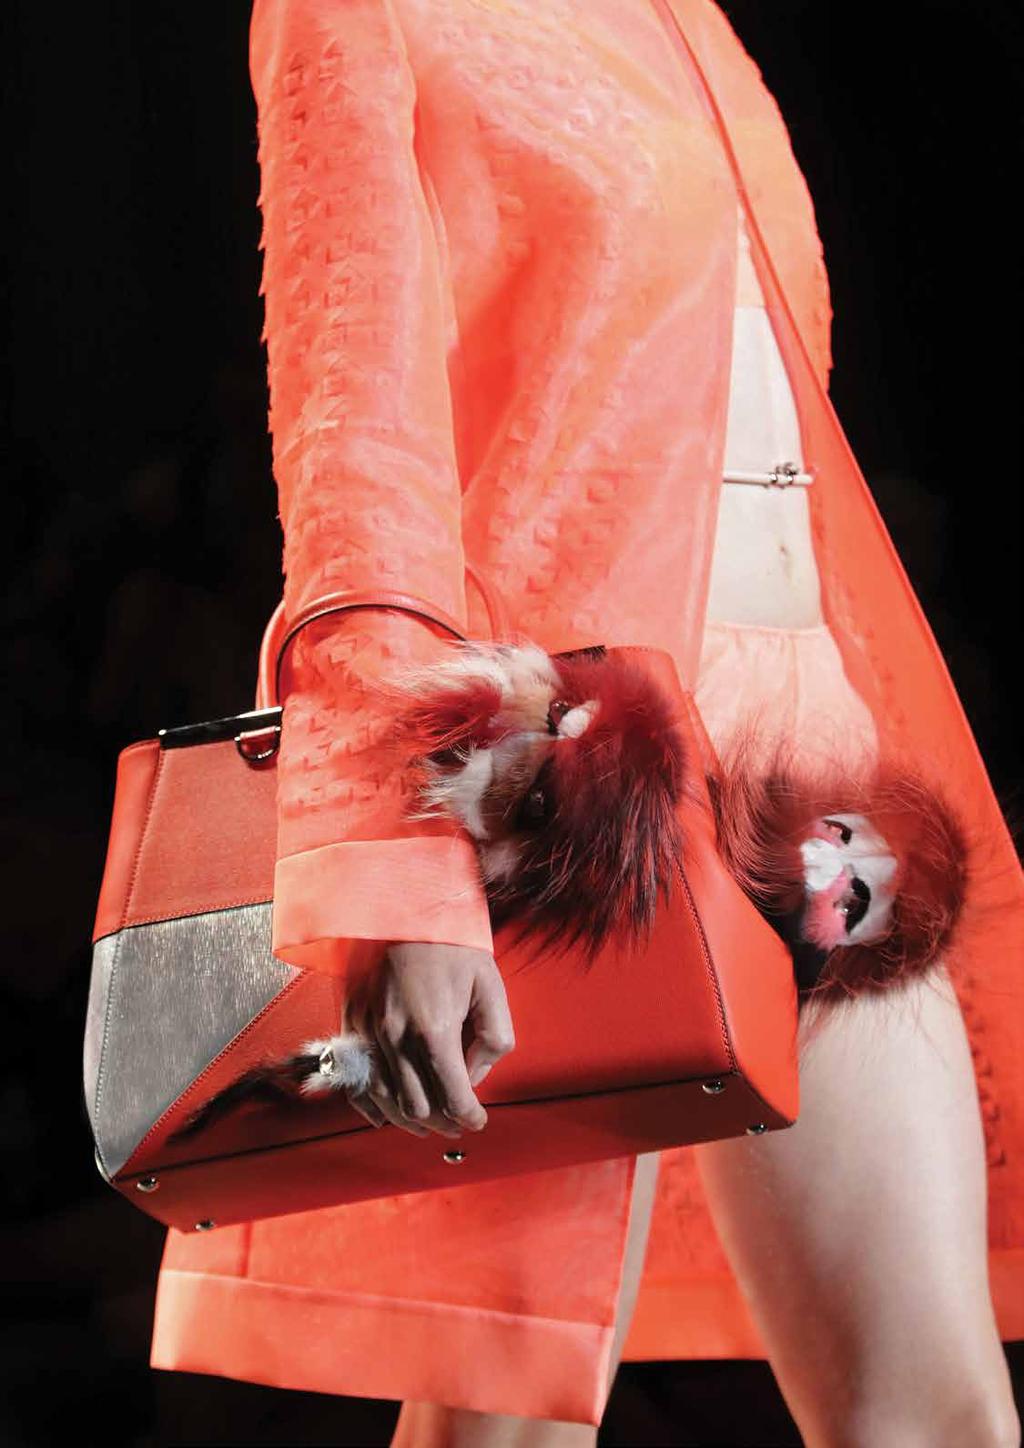 Iconic fashion In the world of Fendi: beauty